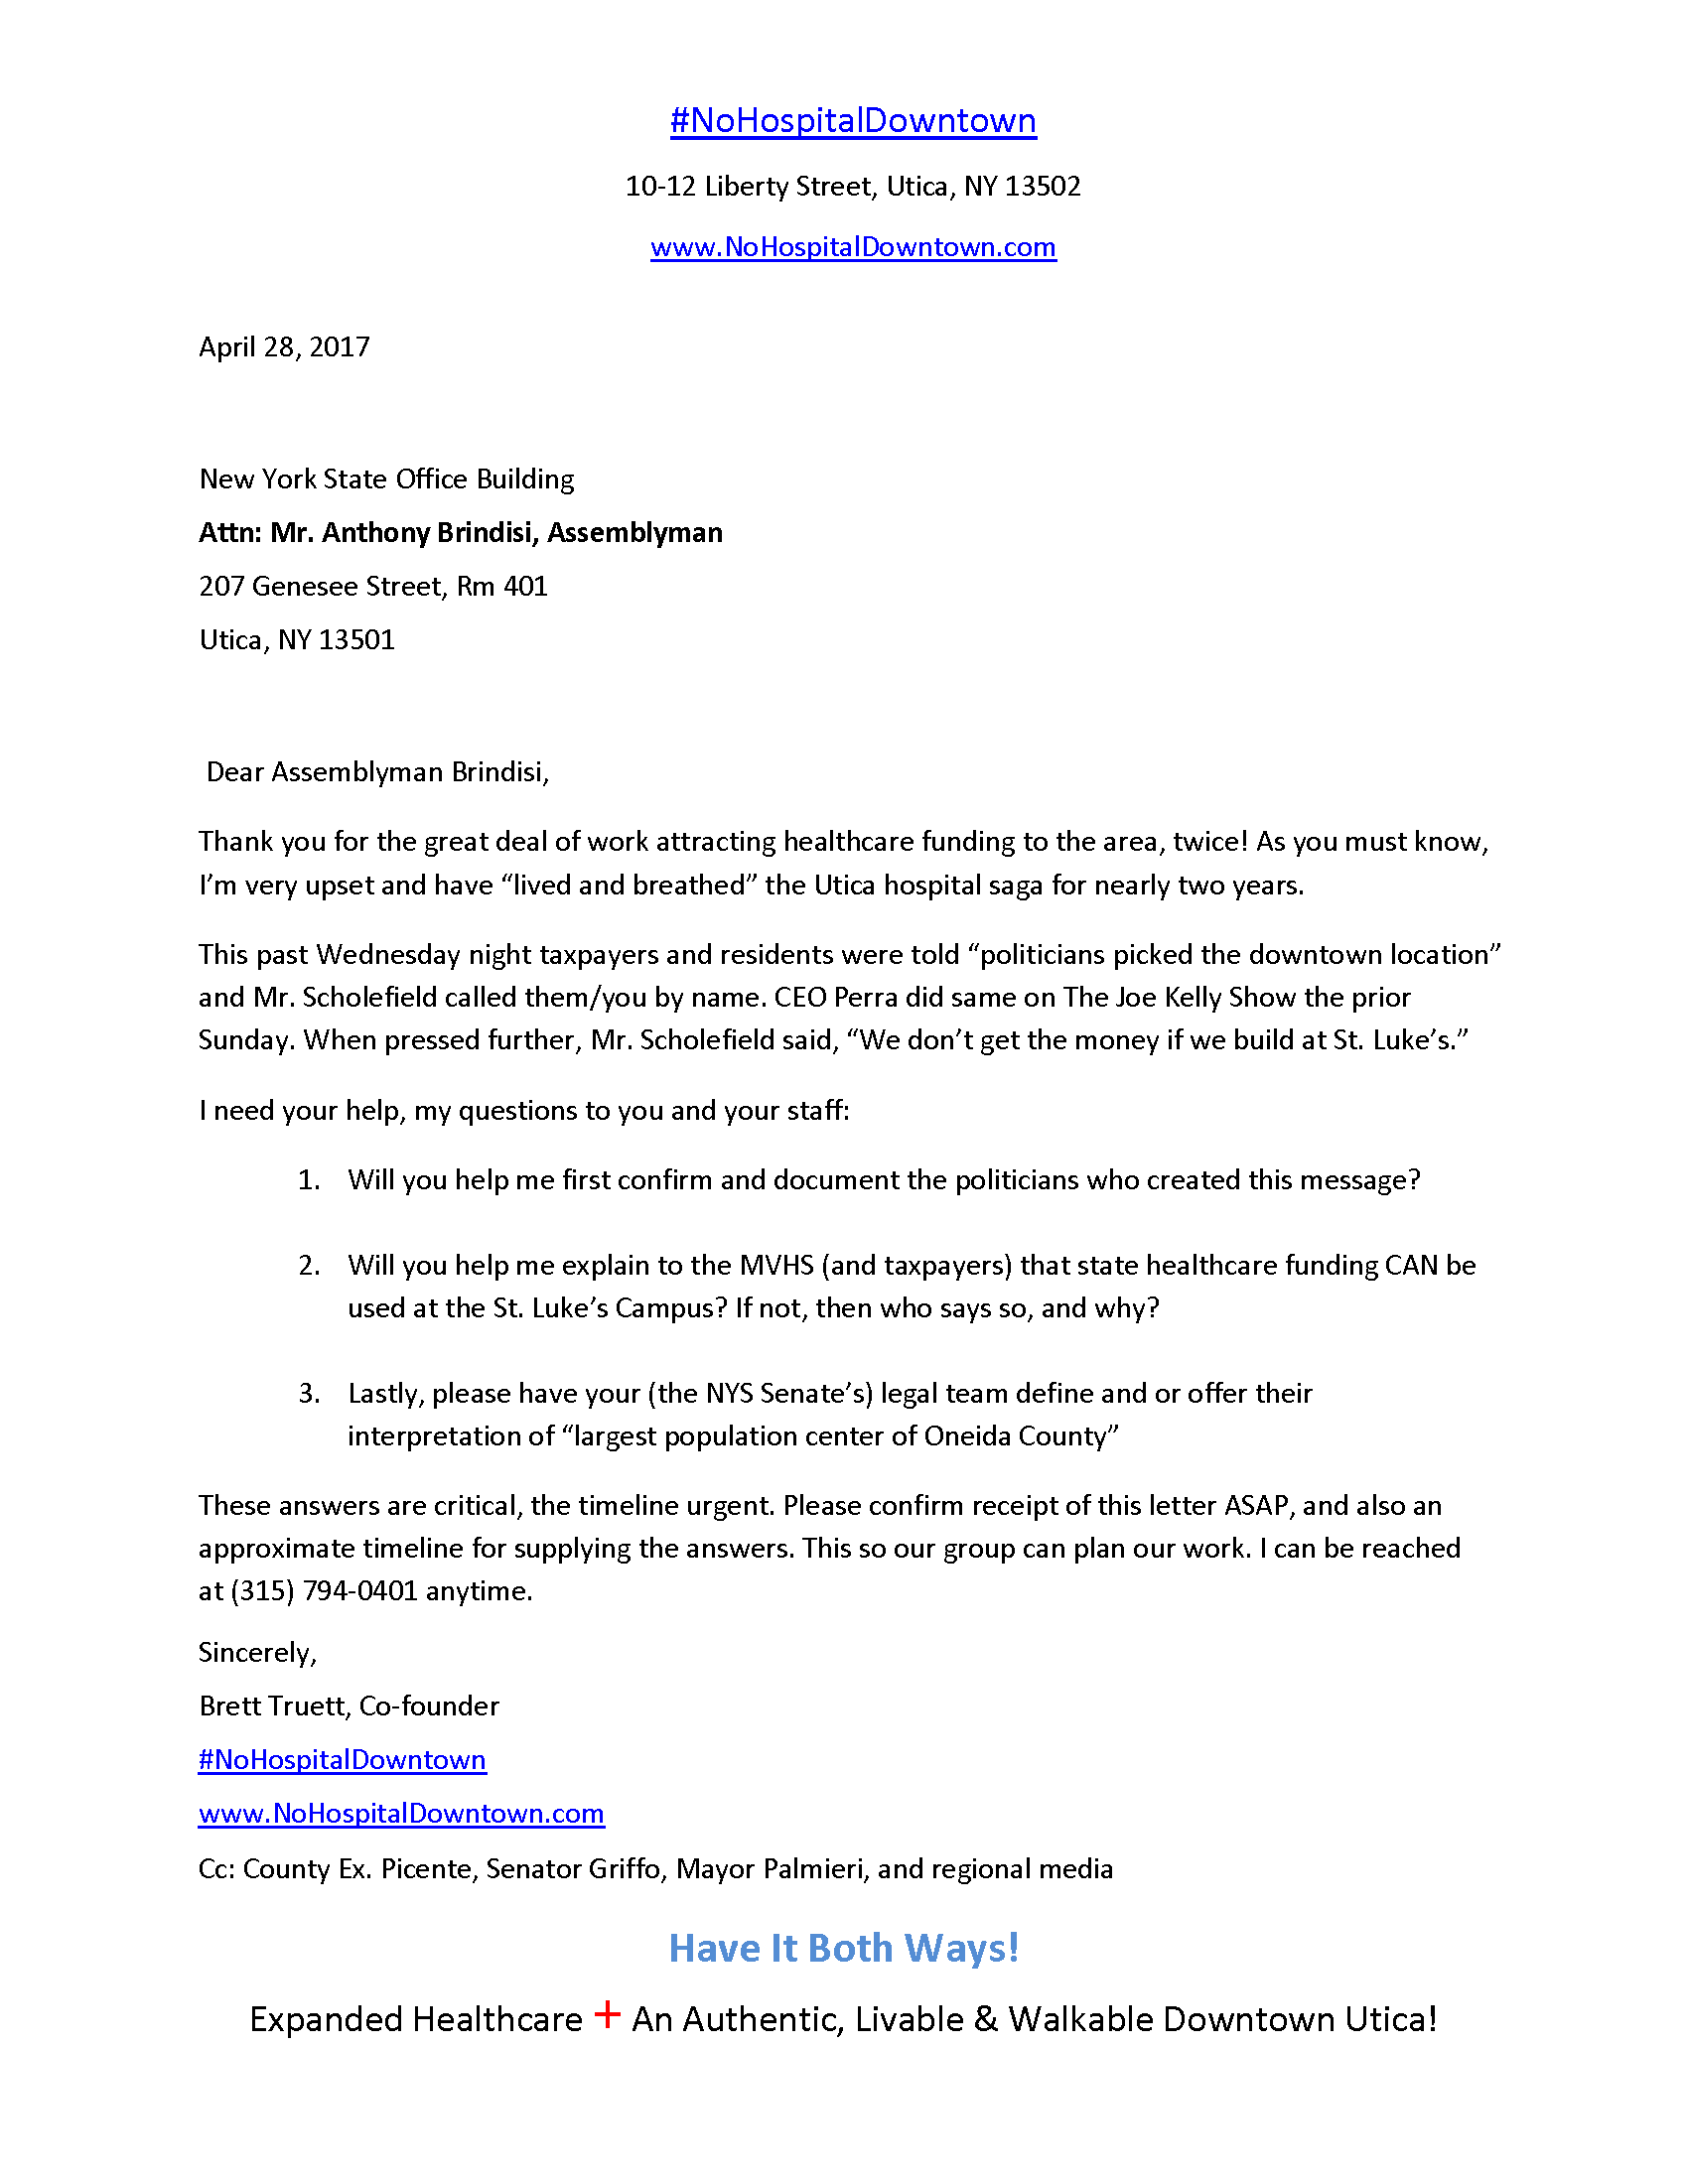 Sample Letter To Senator About Health Care 13